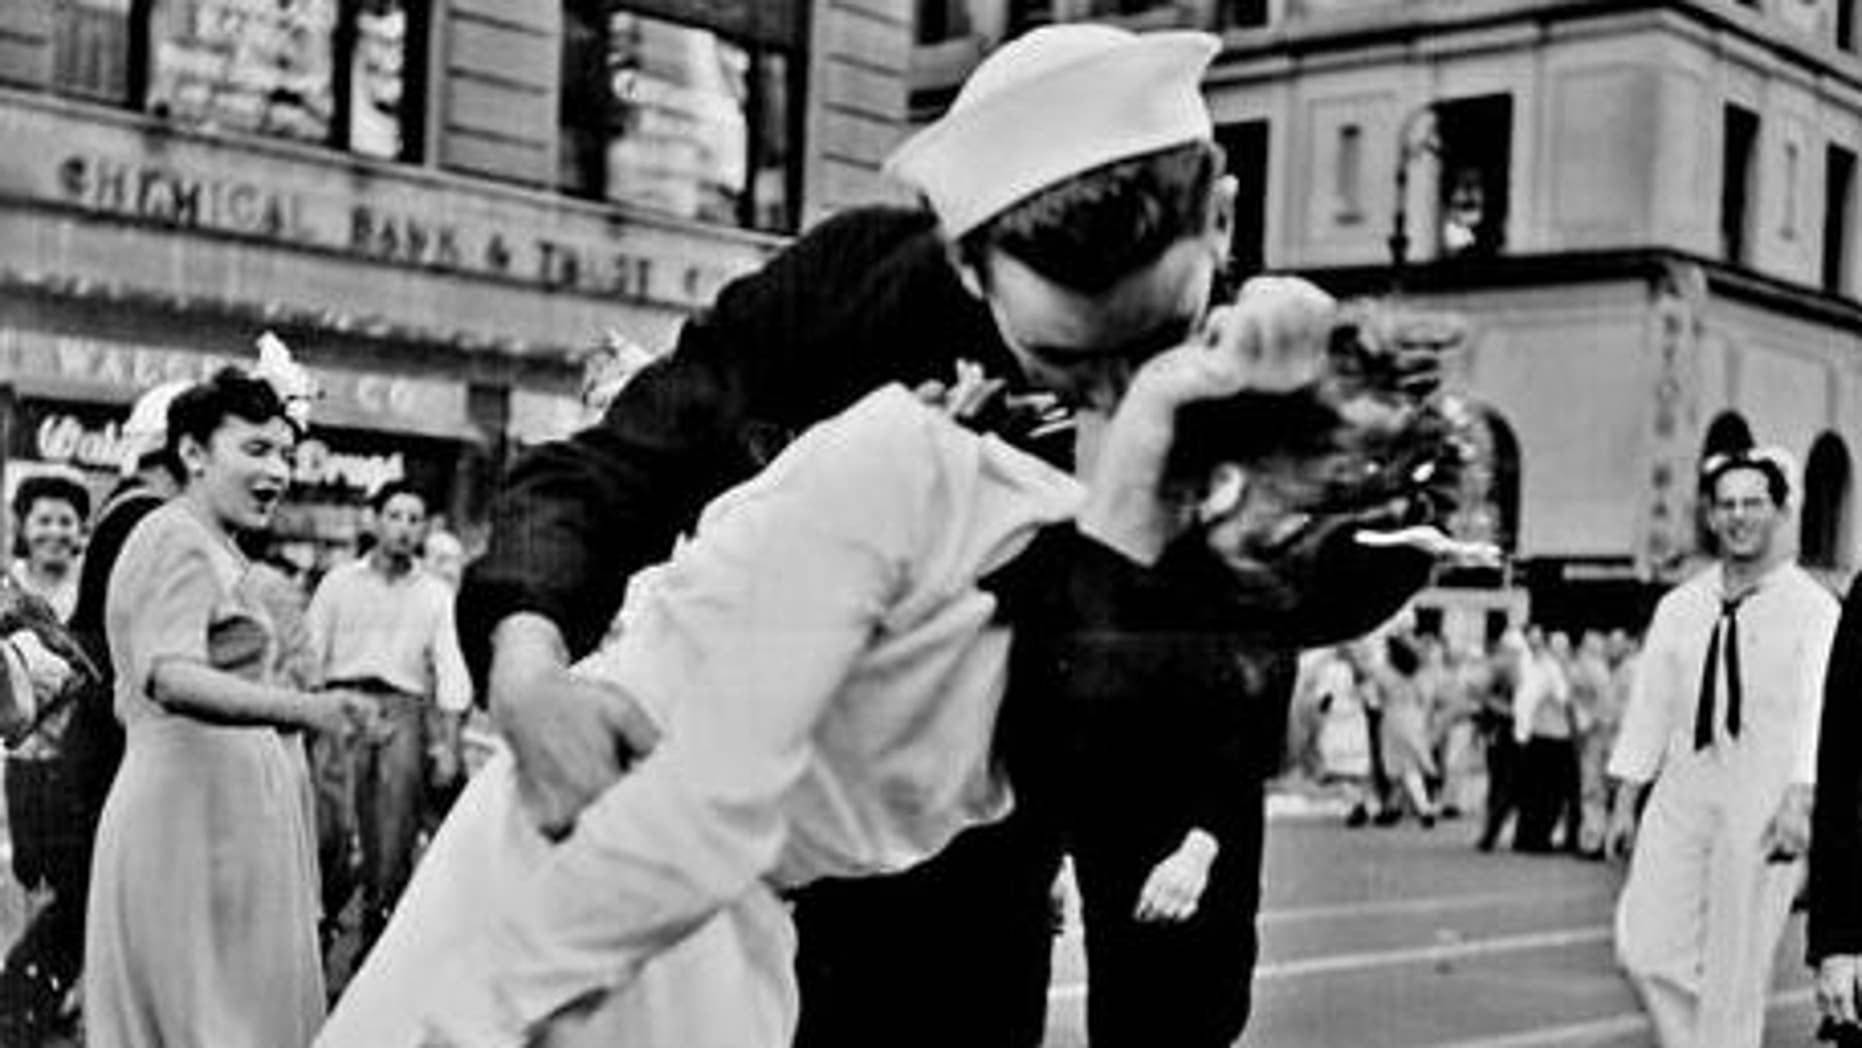 Wwii Nurse In Famous Kiss Photo Dies Aged 91 Fox News 